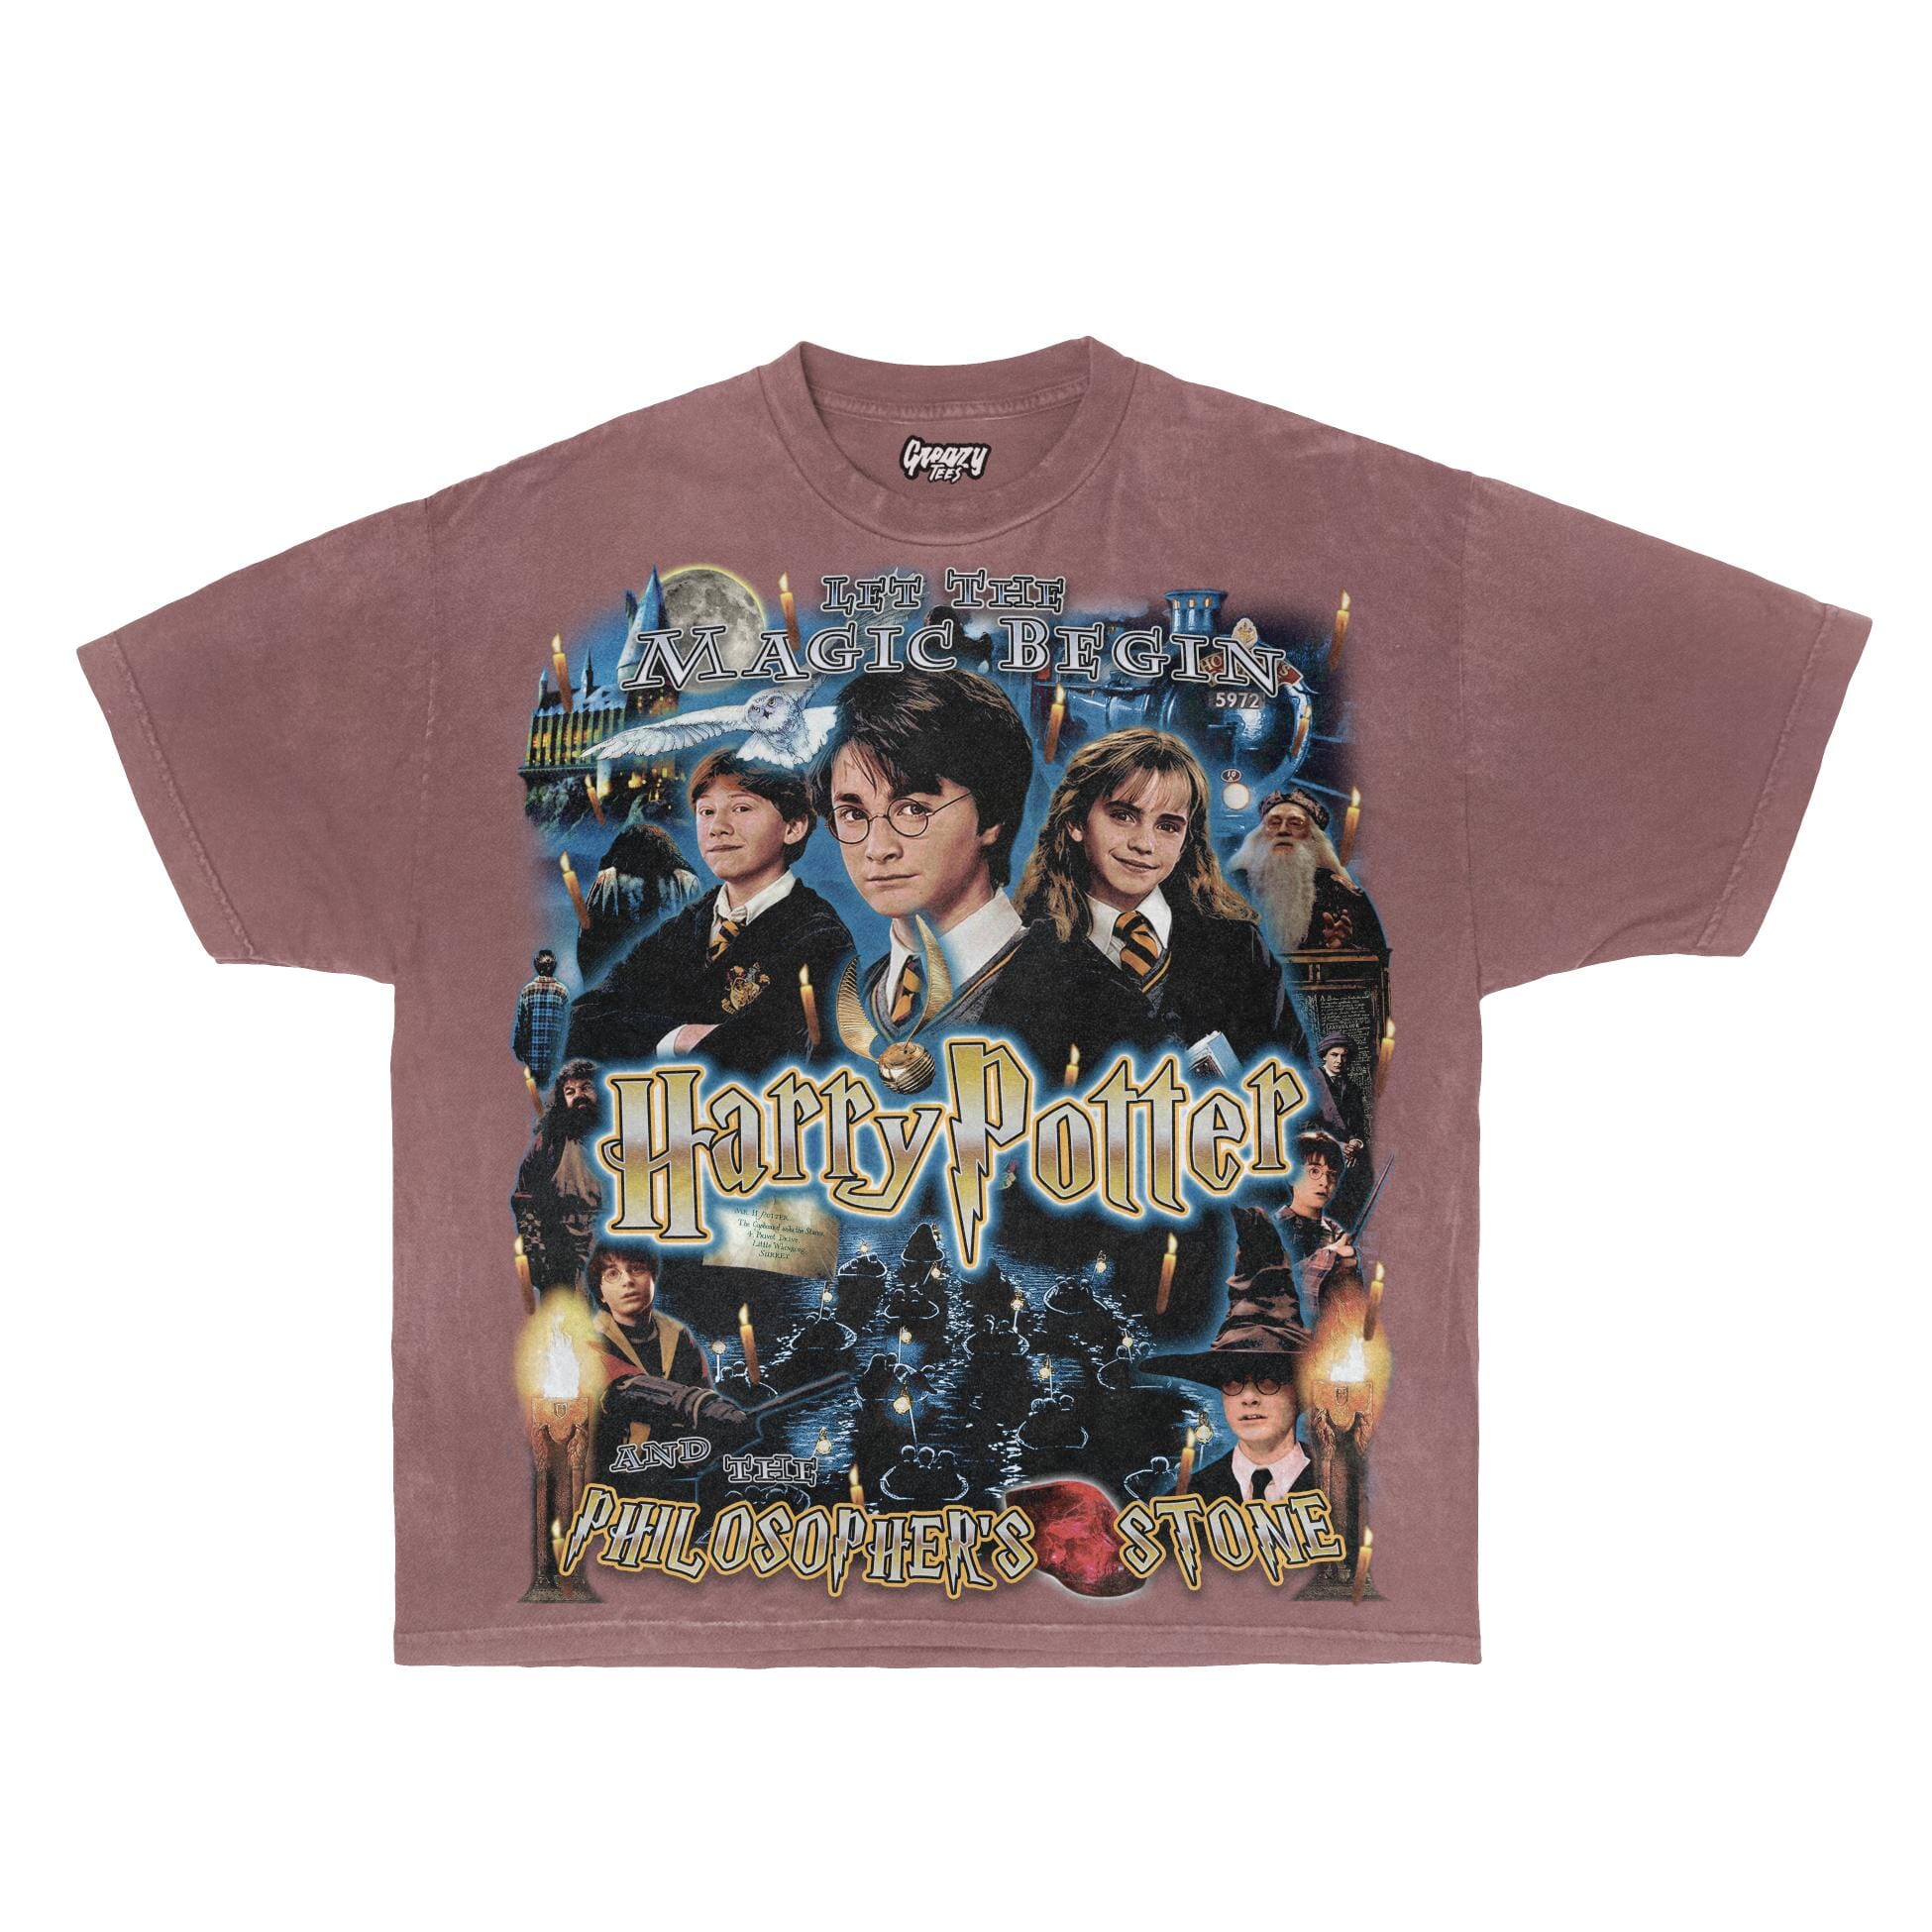 Harry Potter & the Philosopher's Stone Tee Tee Greazy Tees XS Coffee Brown Oversized